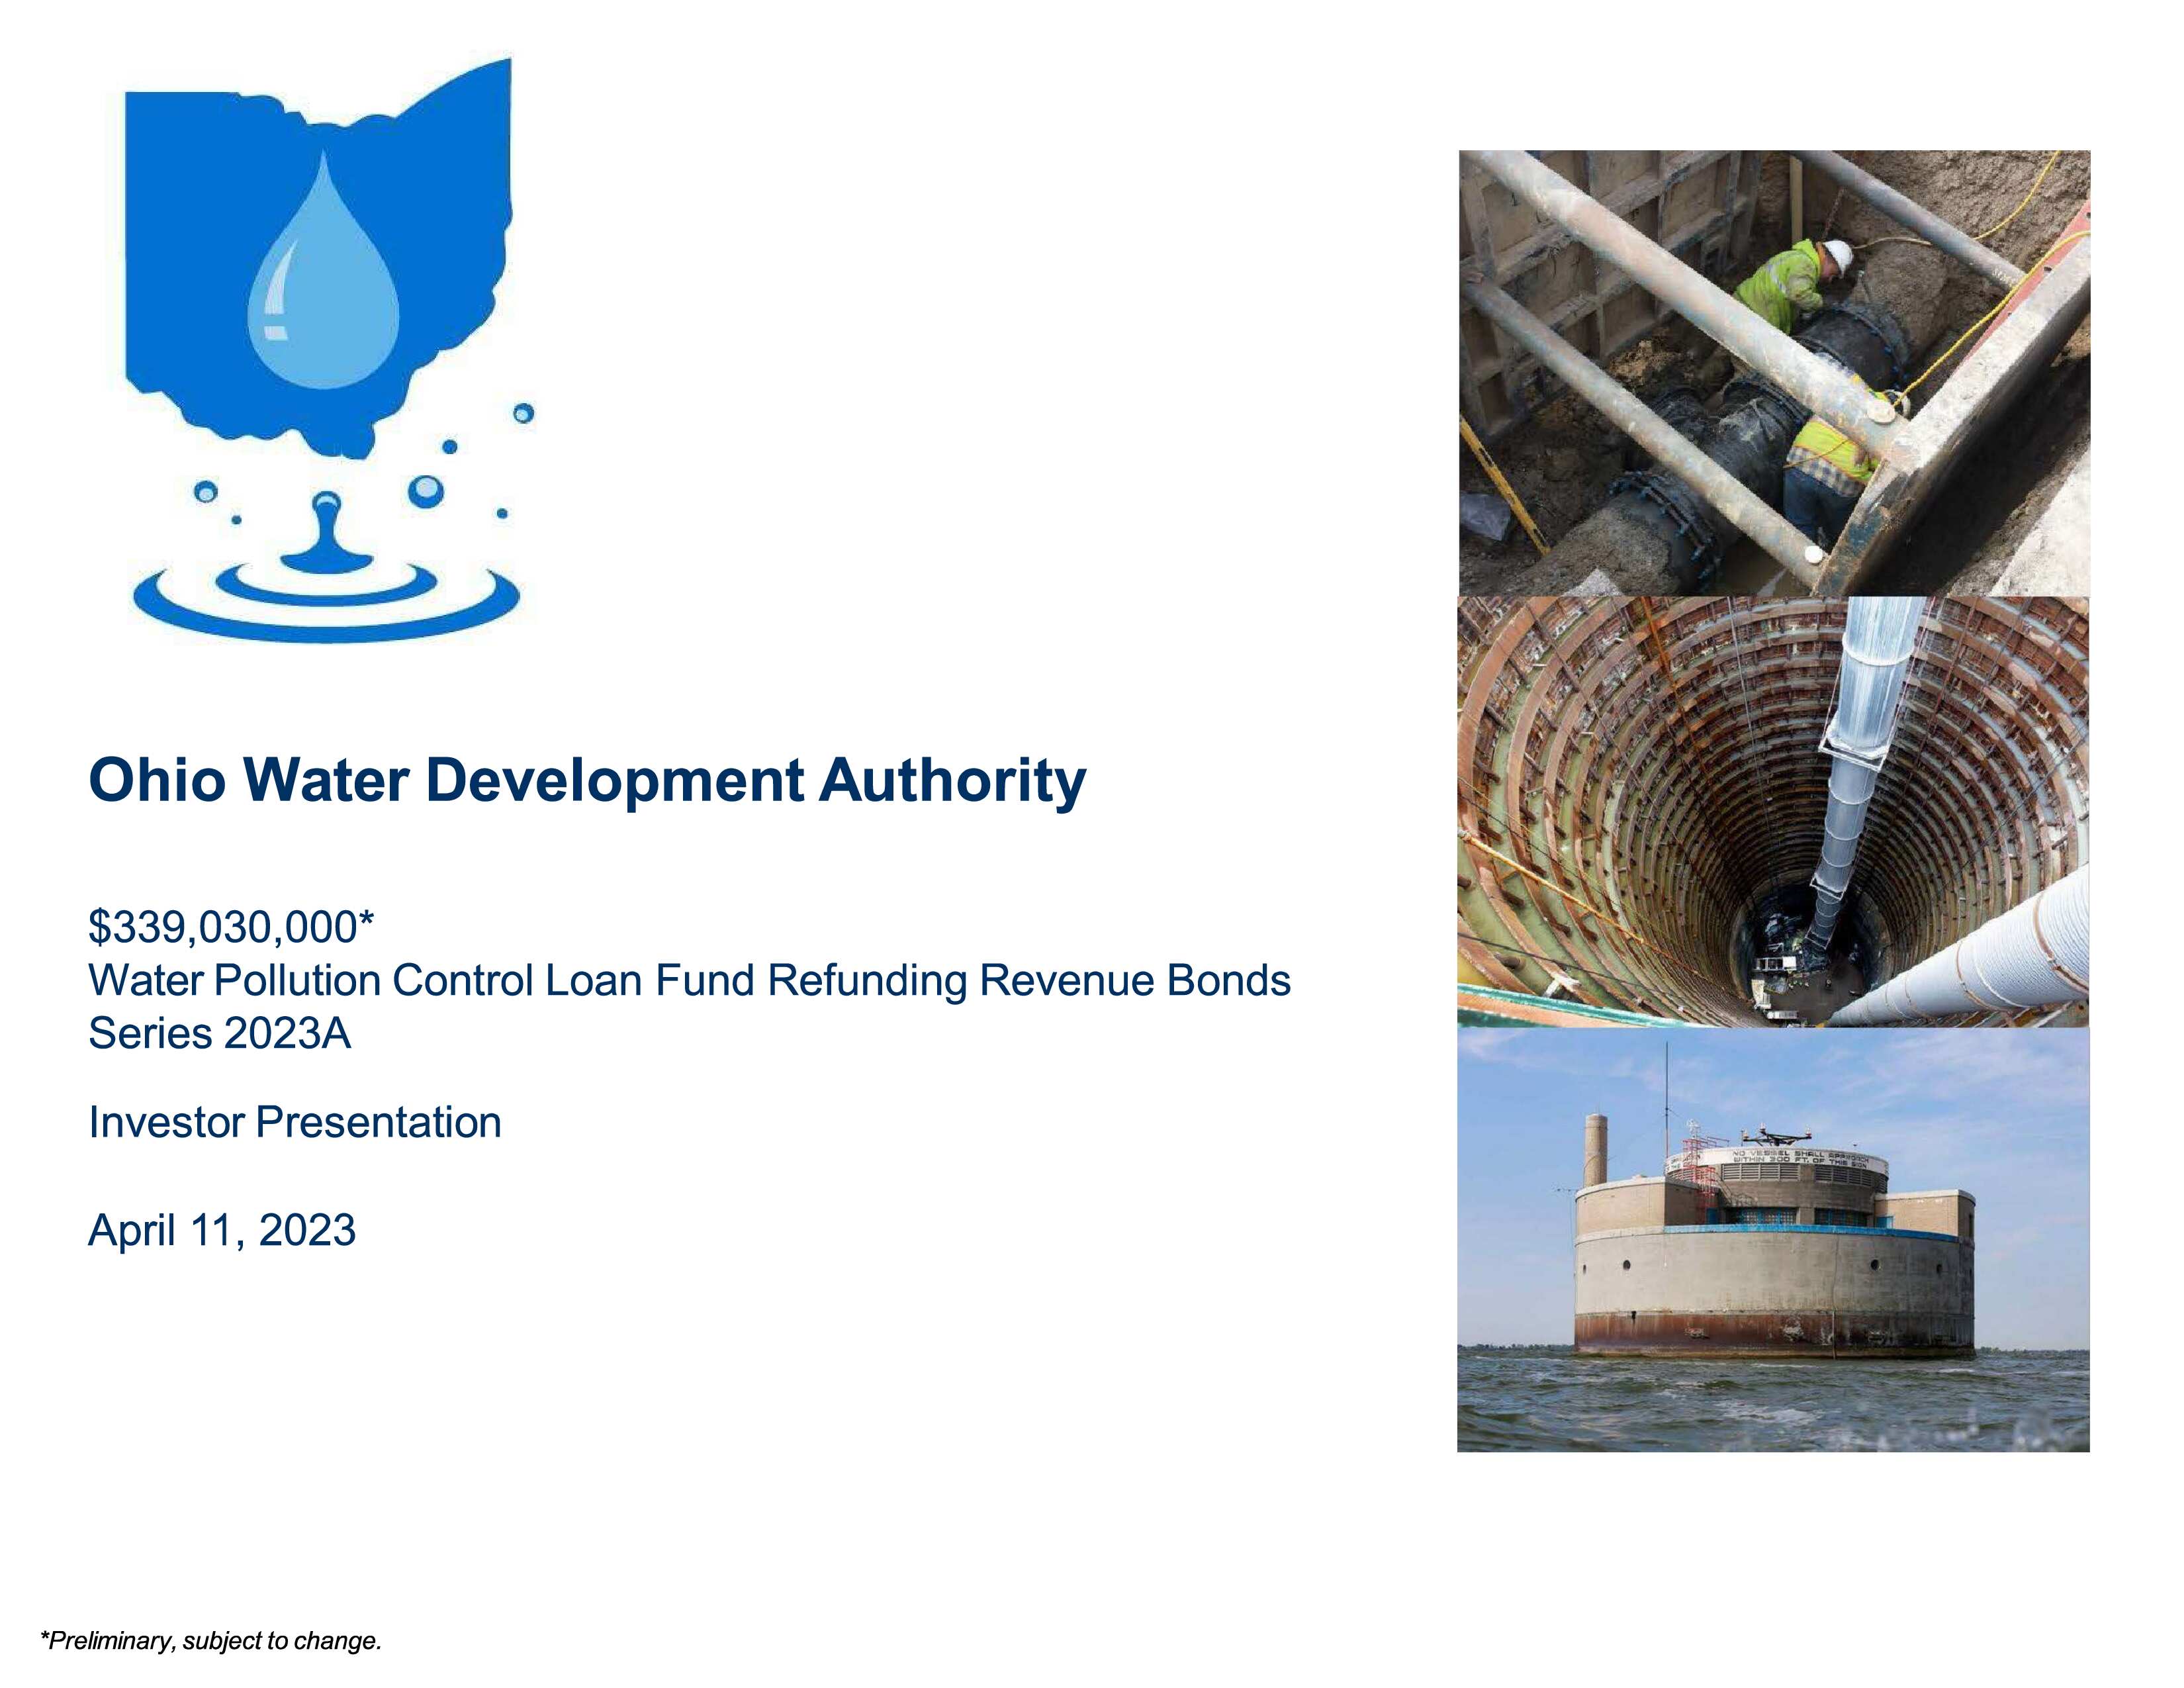 Water Pollution Control Loan Fund Refunding Revenue Bonds, Series 2023A